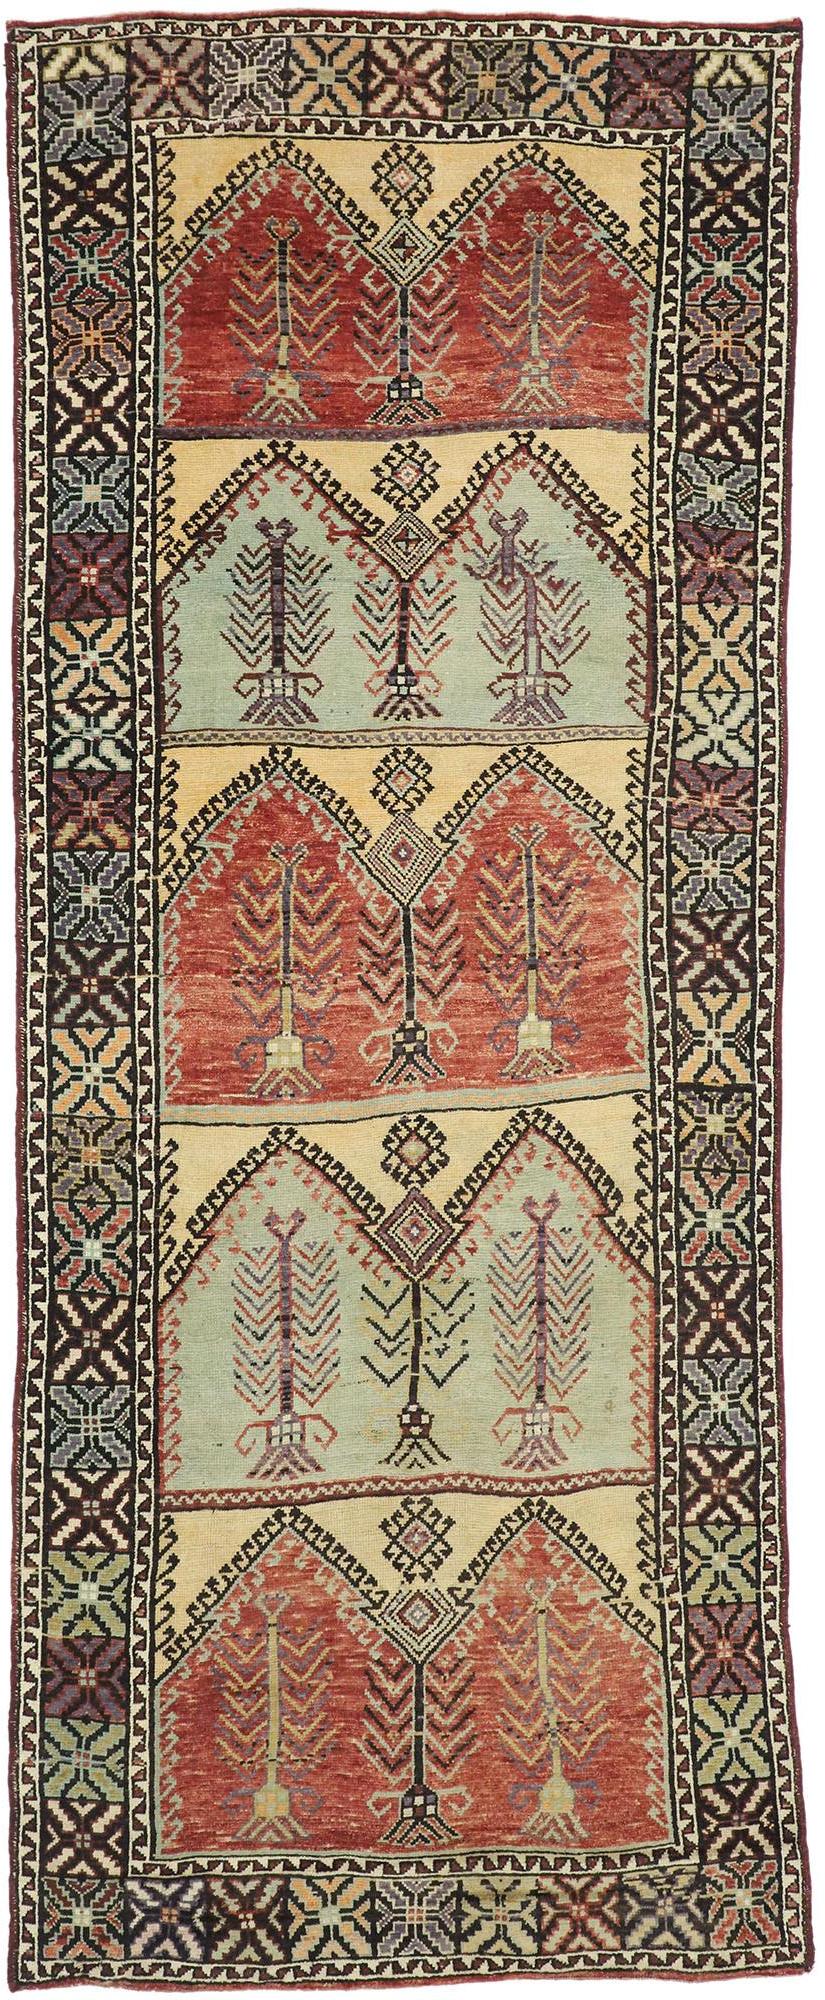 51356 Vintage Anatolian Saph Rug, Turkish Prayer Rug with Multiple Mihrabs 05’04 x 13’04. Time-softened colors and Mid-Century Modern style collide in this hand knotted vintage Anatolian Saph rug. The directional Turkish prayer rug beautifully